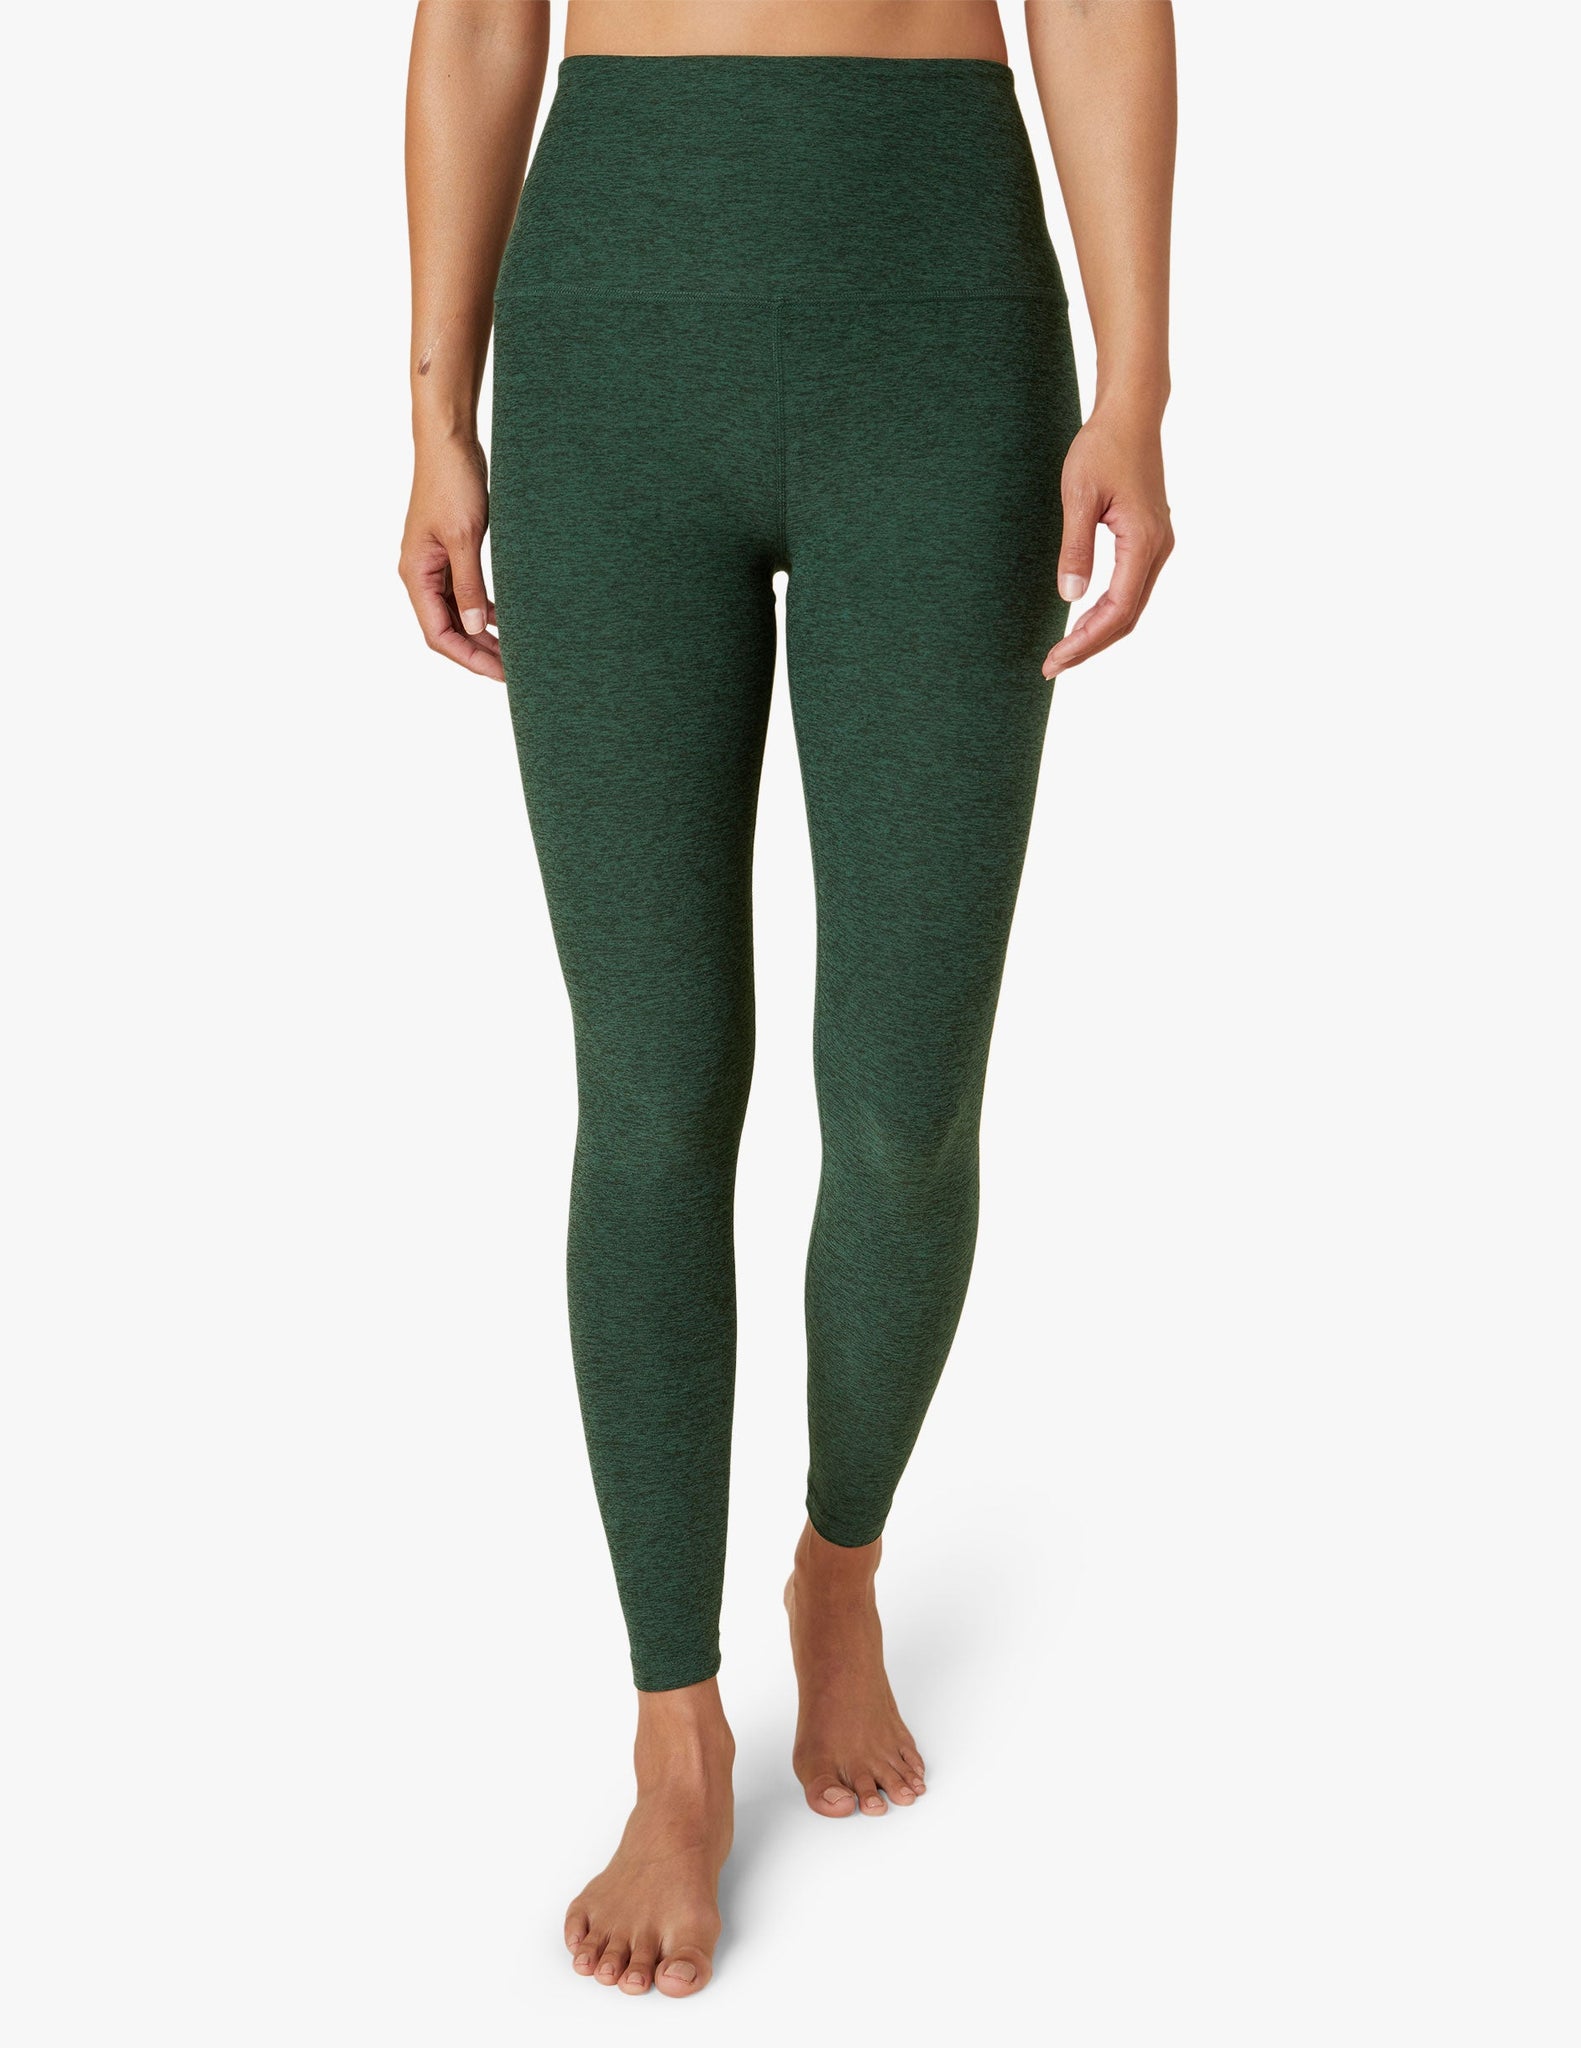 Beyond Yoga Spacedye Caught In The Midi High Waisted Legging | Workout  attire, Stylish workout clothes, High waisted leggings